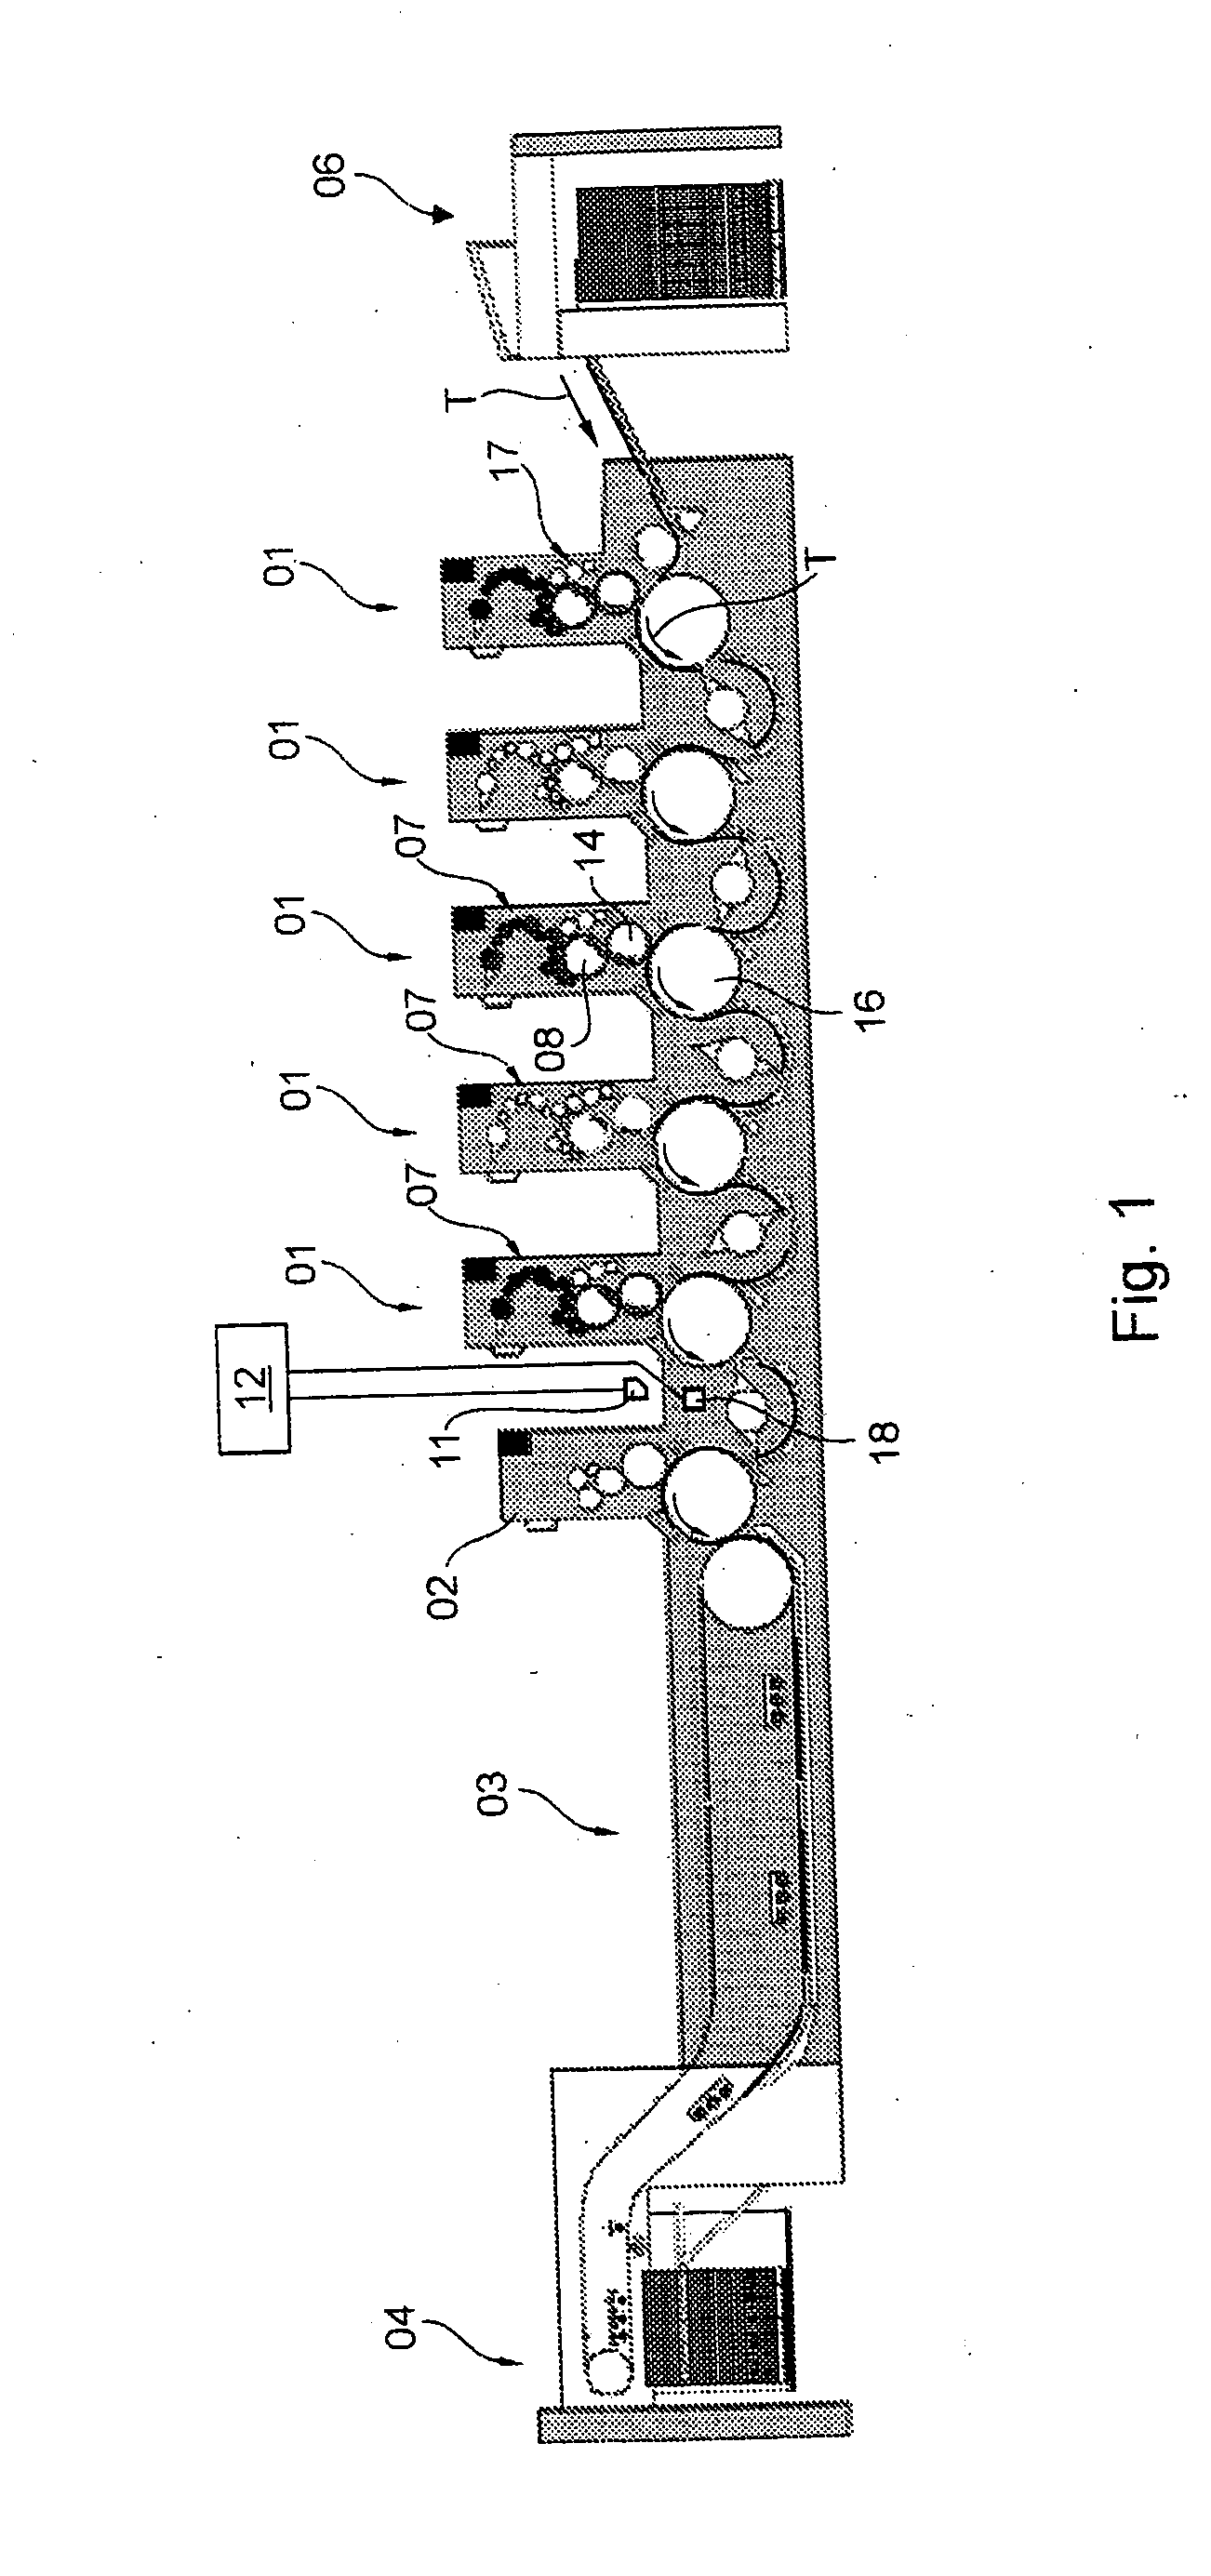 Method for assessing the plausibility of at least one measured value determined in a printing press